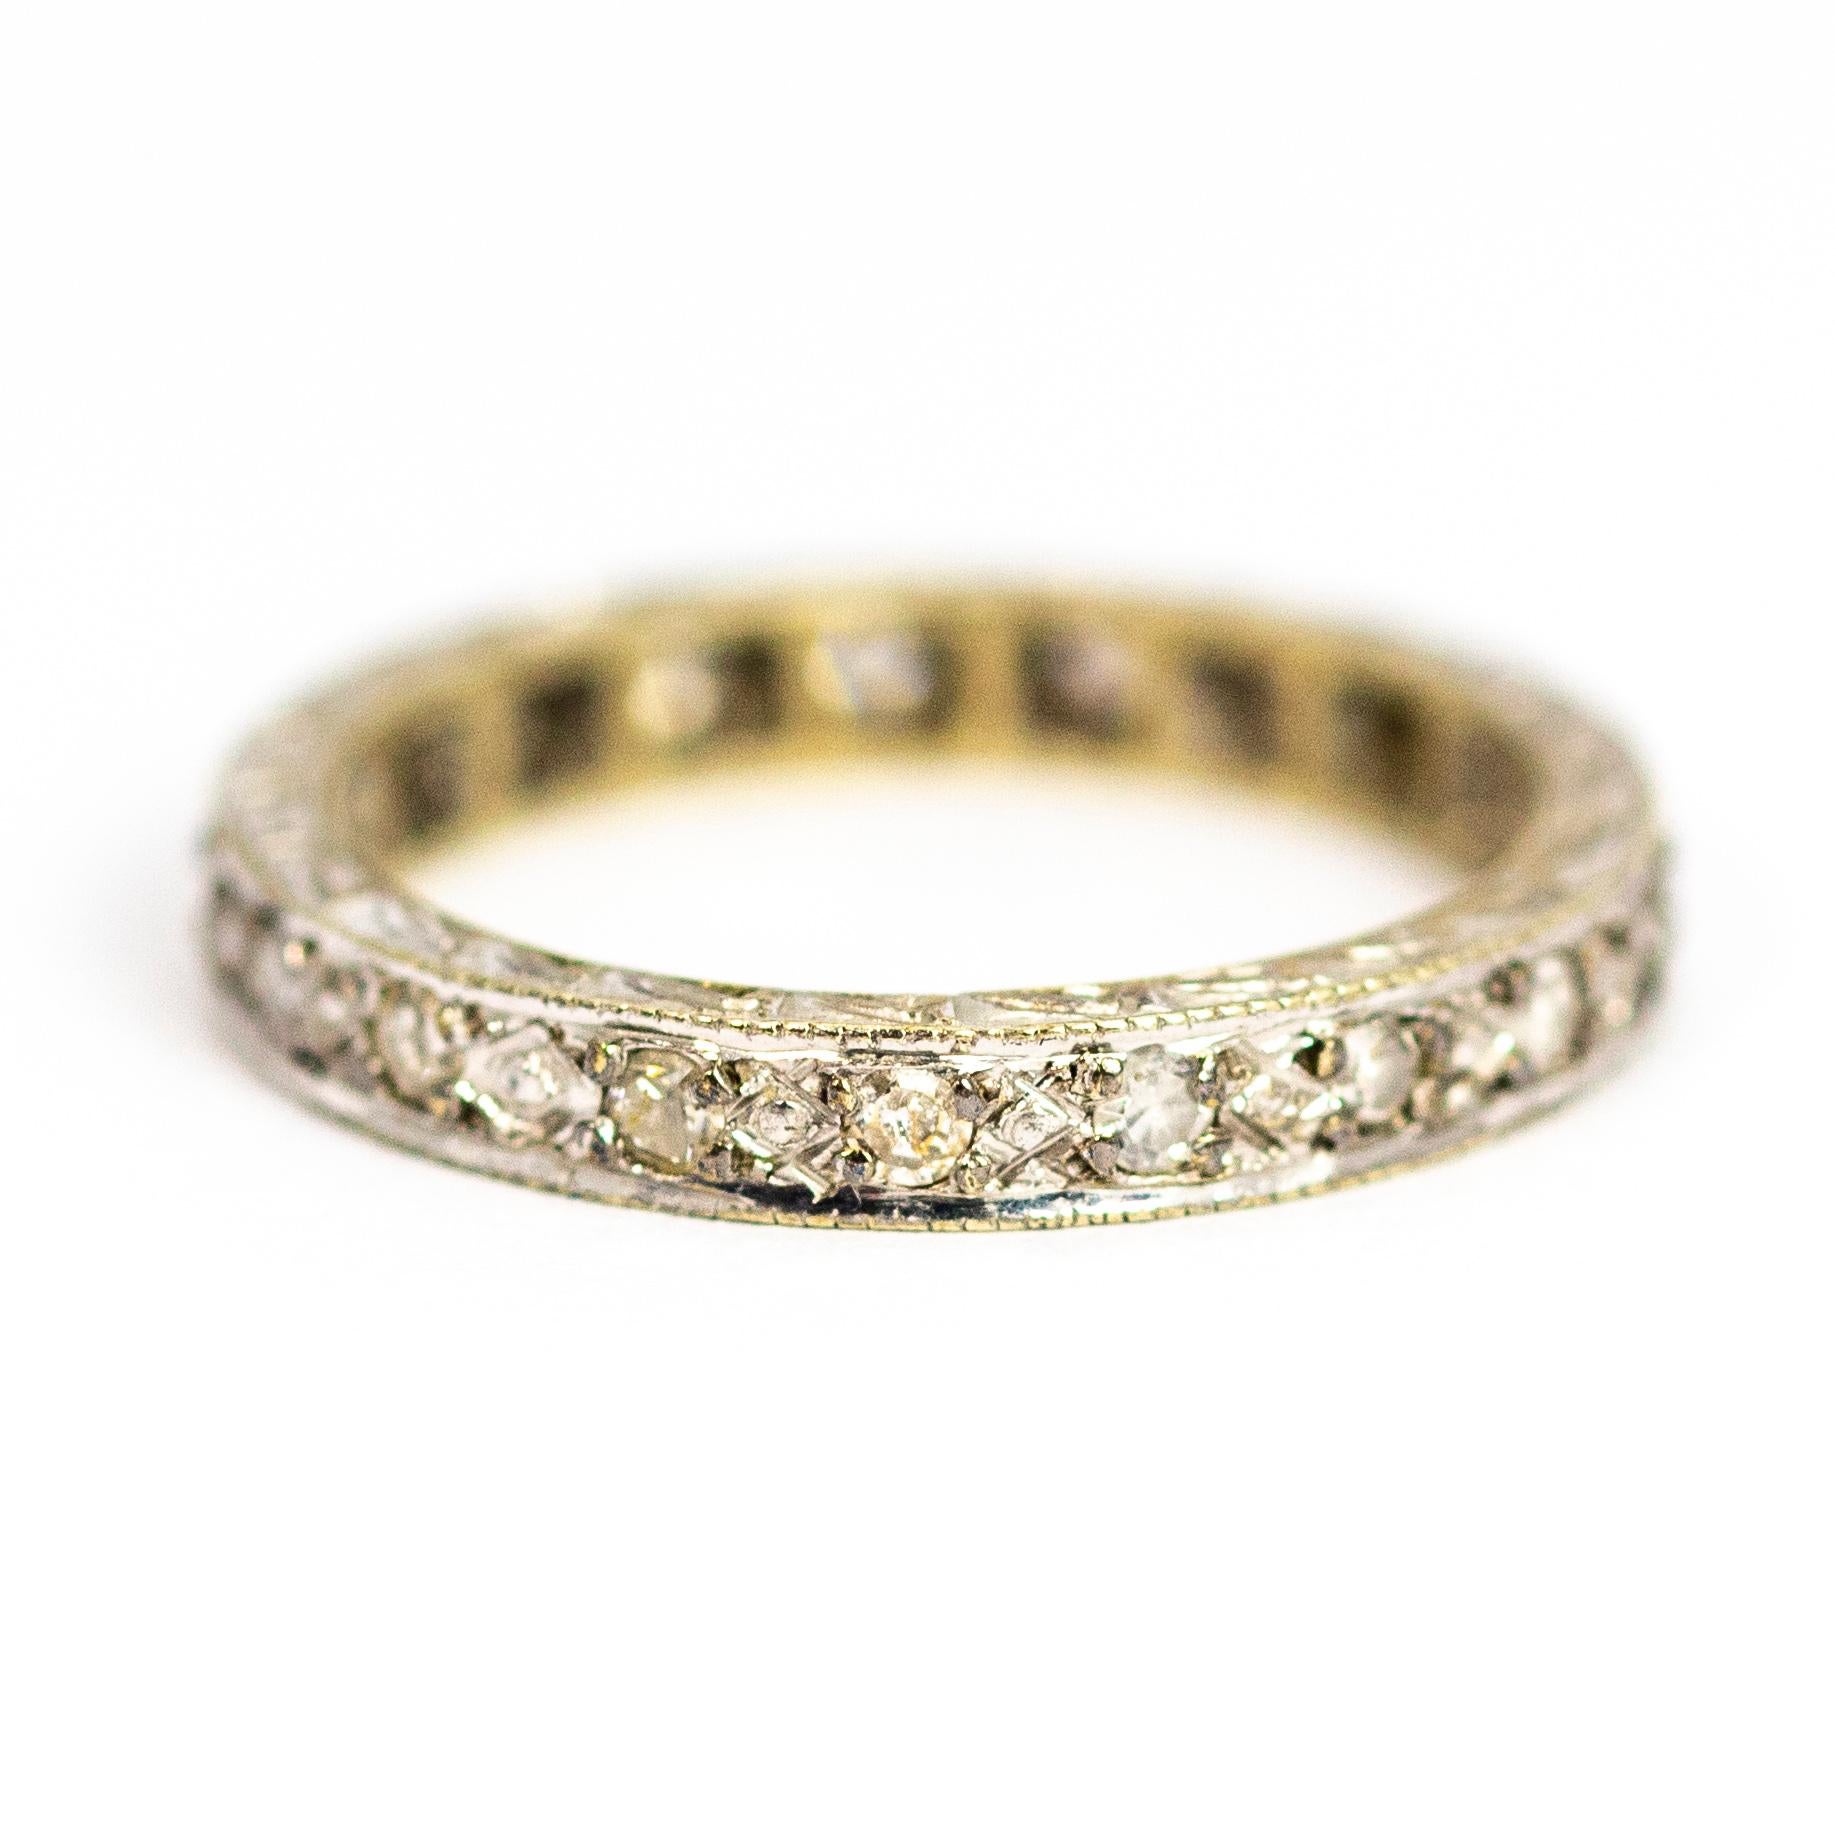 A beautiful vintage eternity band fully set with stunning round cut white diamonds. Modelled in 18 carat white gold.

Band Width: 2.78mm

Depth to Finger: 1.98mm

Ring Size: UK K, US 5 1/2